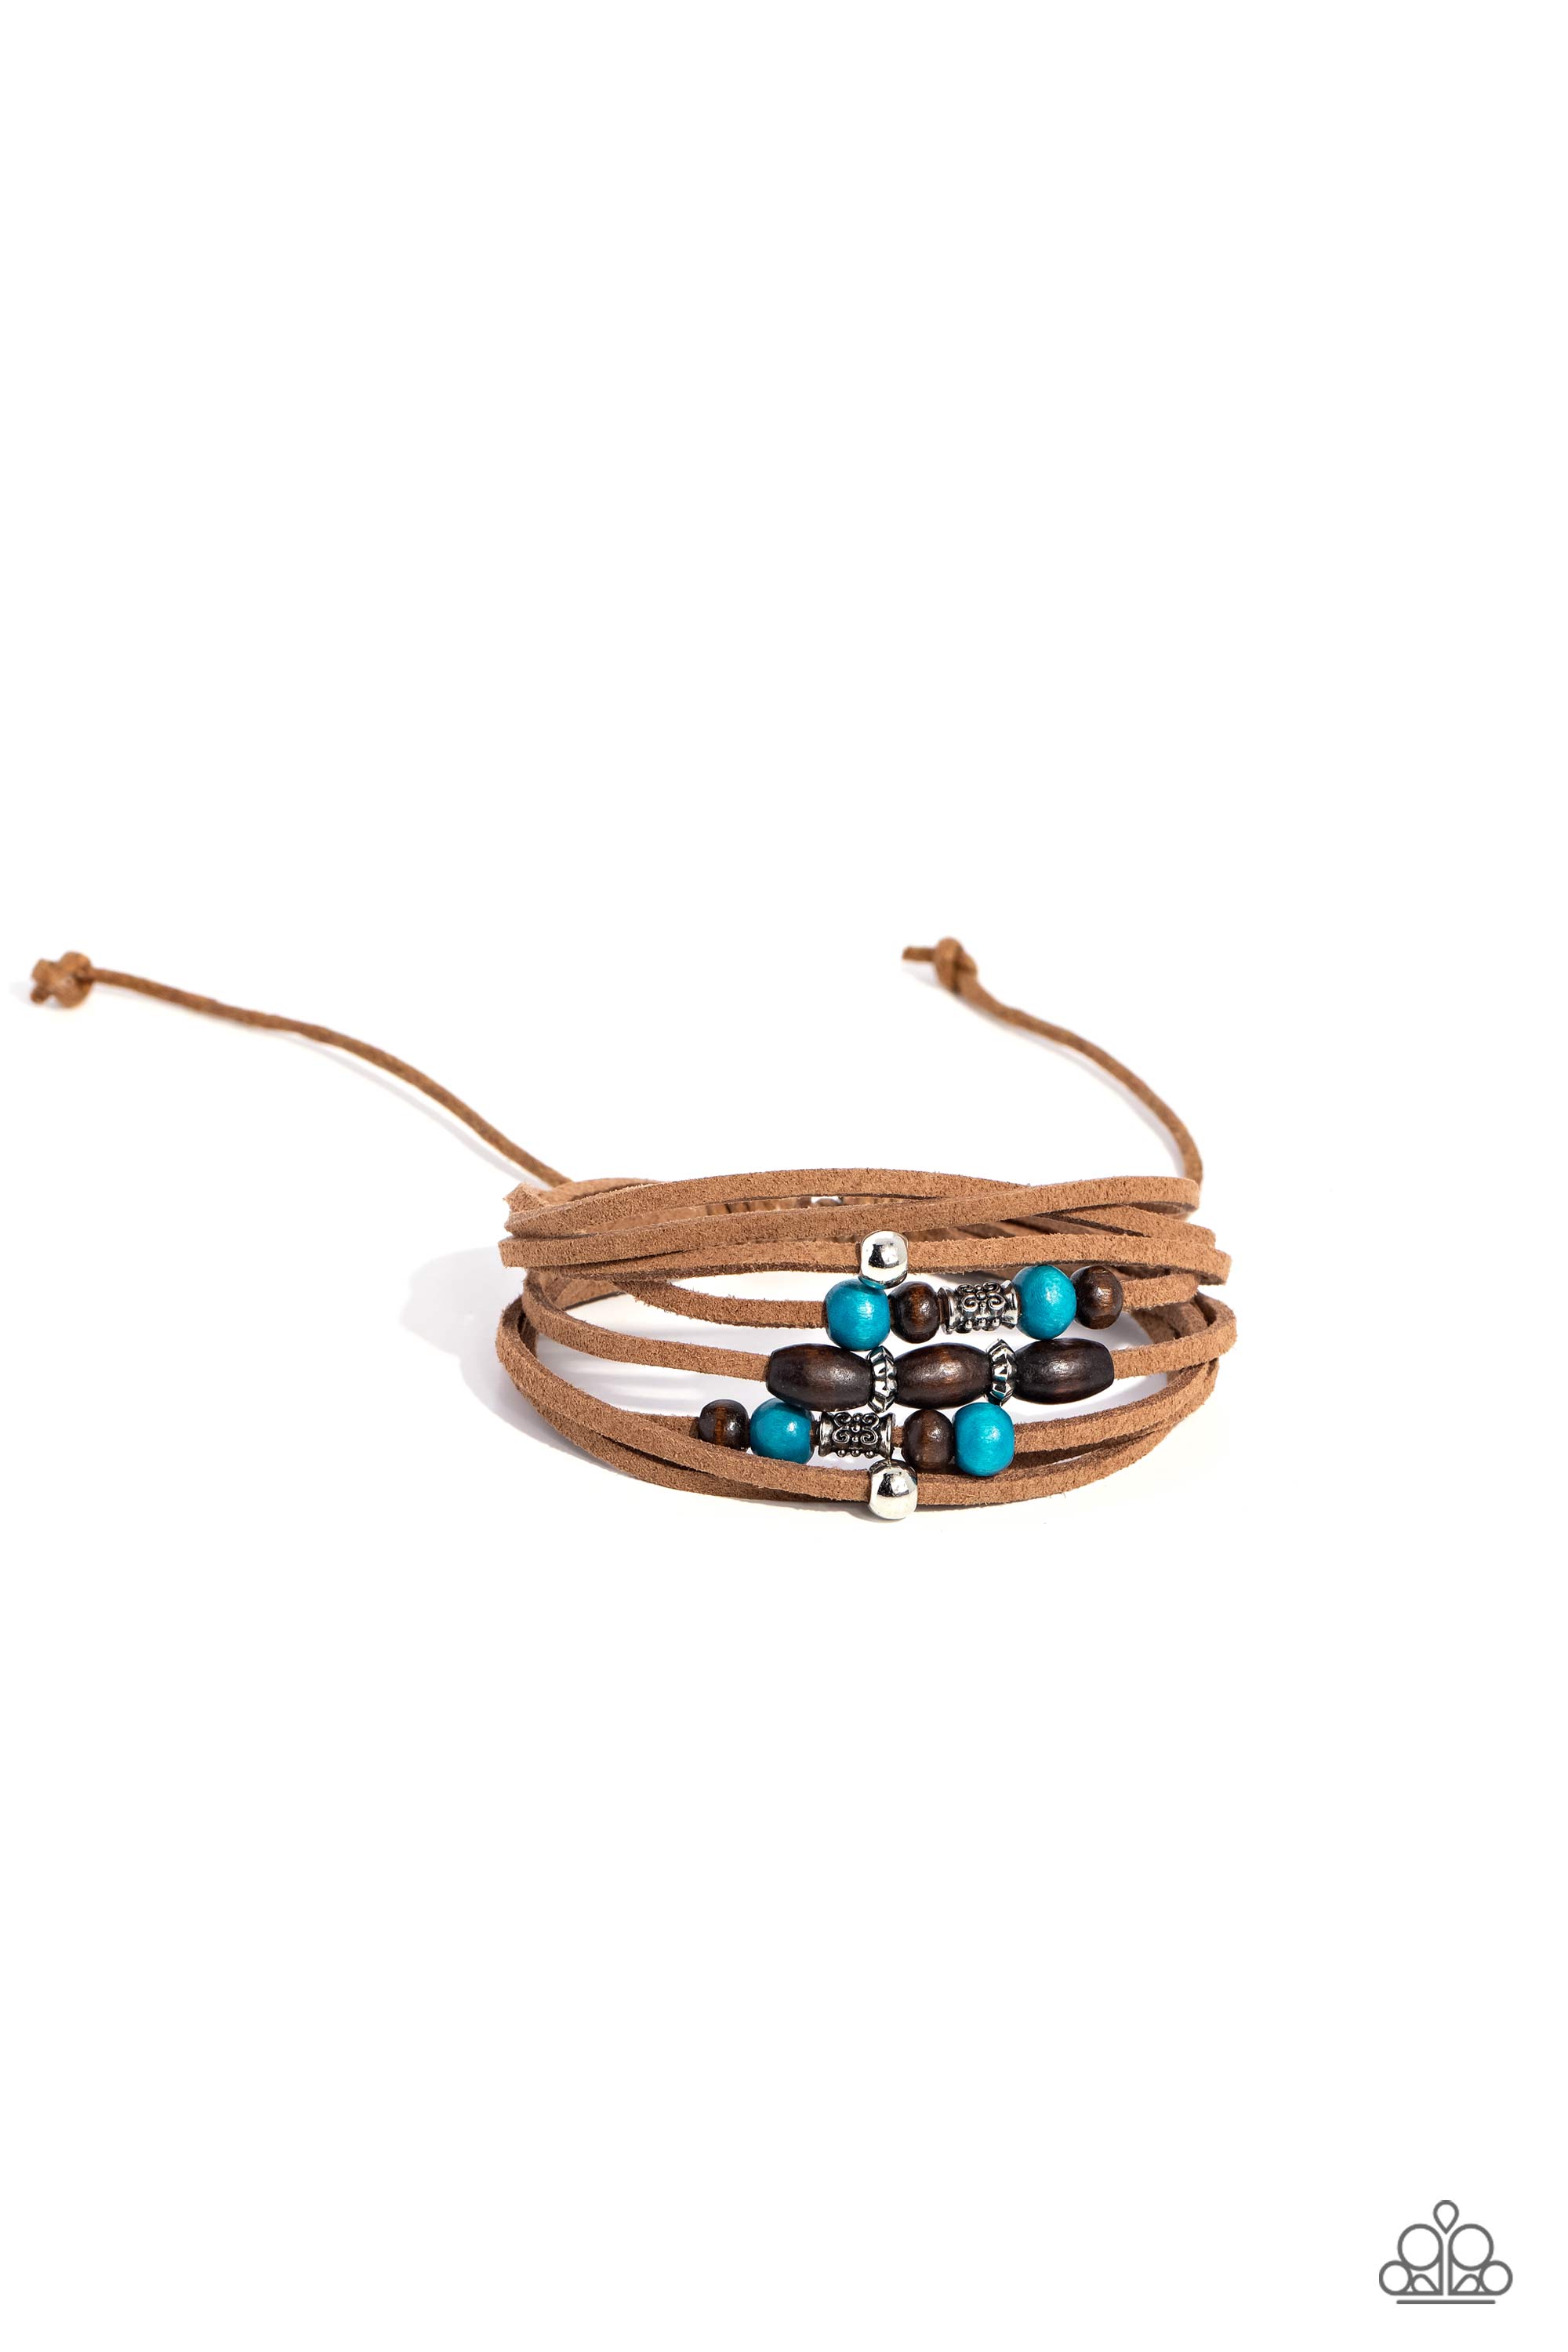 Absolutely WANDER-ful Blue Urban Slide Bracelet - Paparazzi Accessories- lightbox - CarasShop.com - $5 Jewelry by Cara Jewels